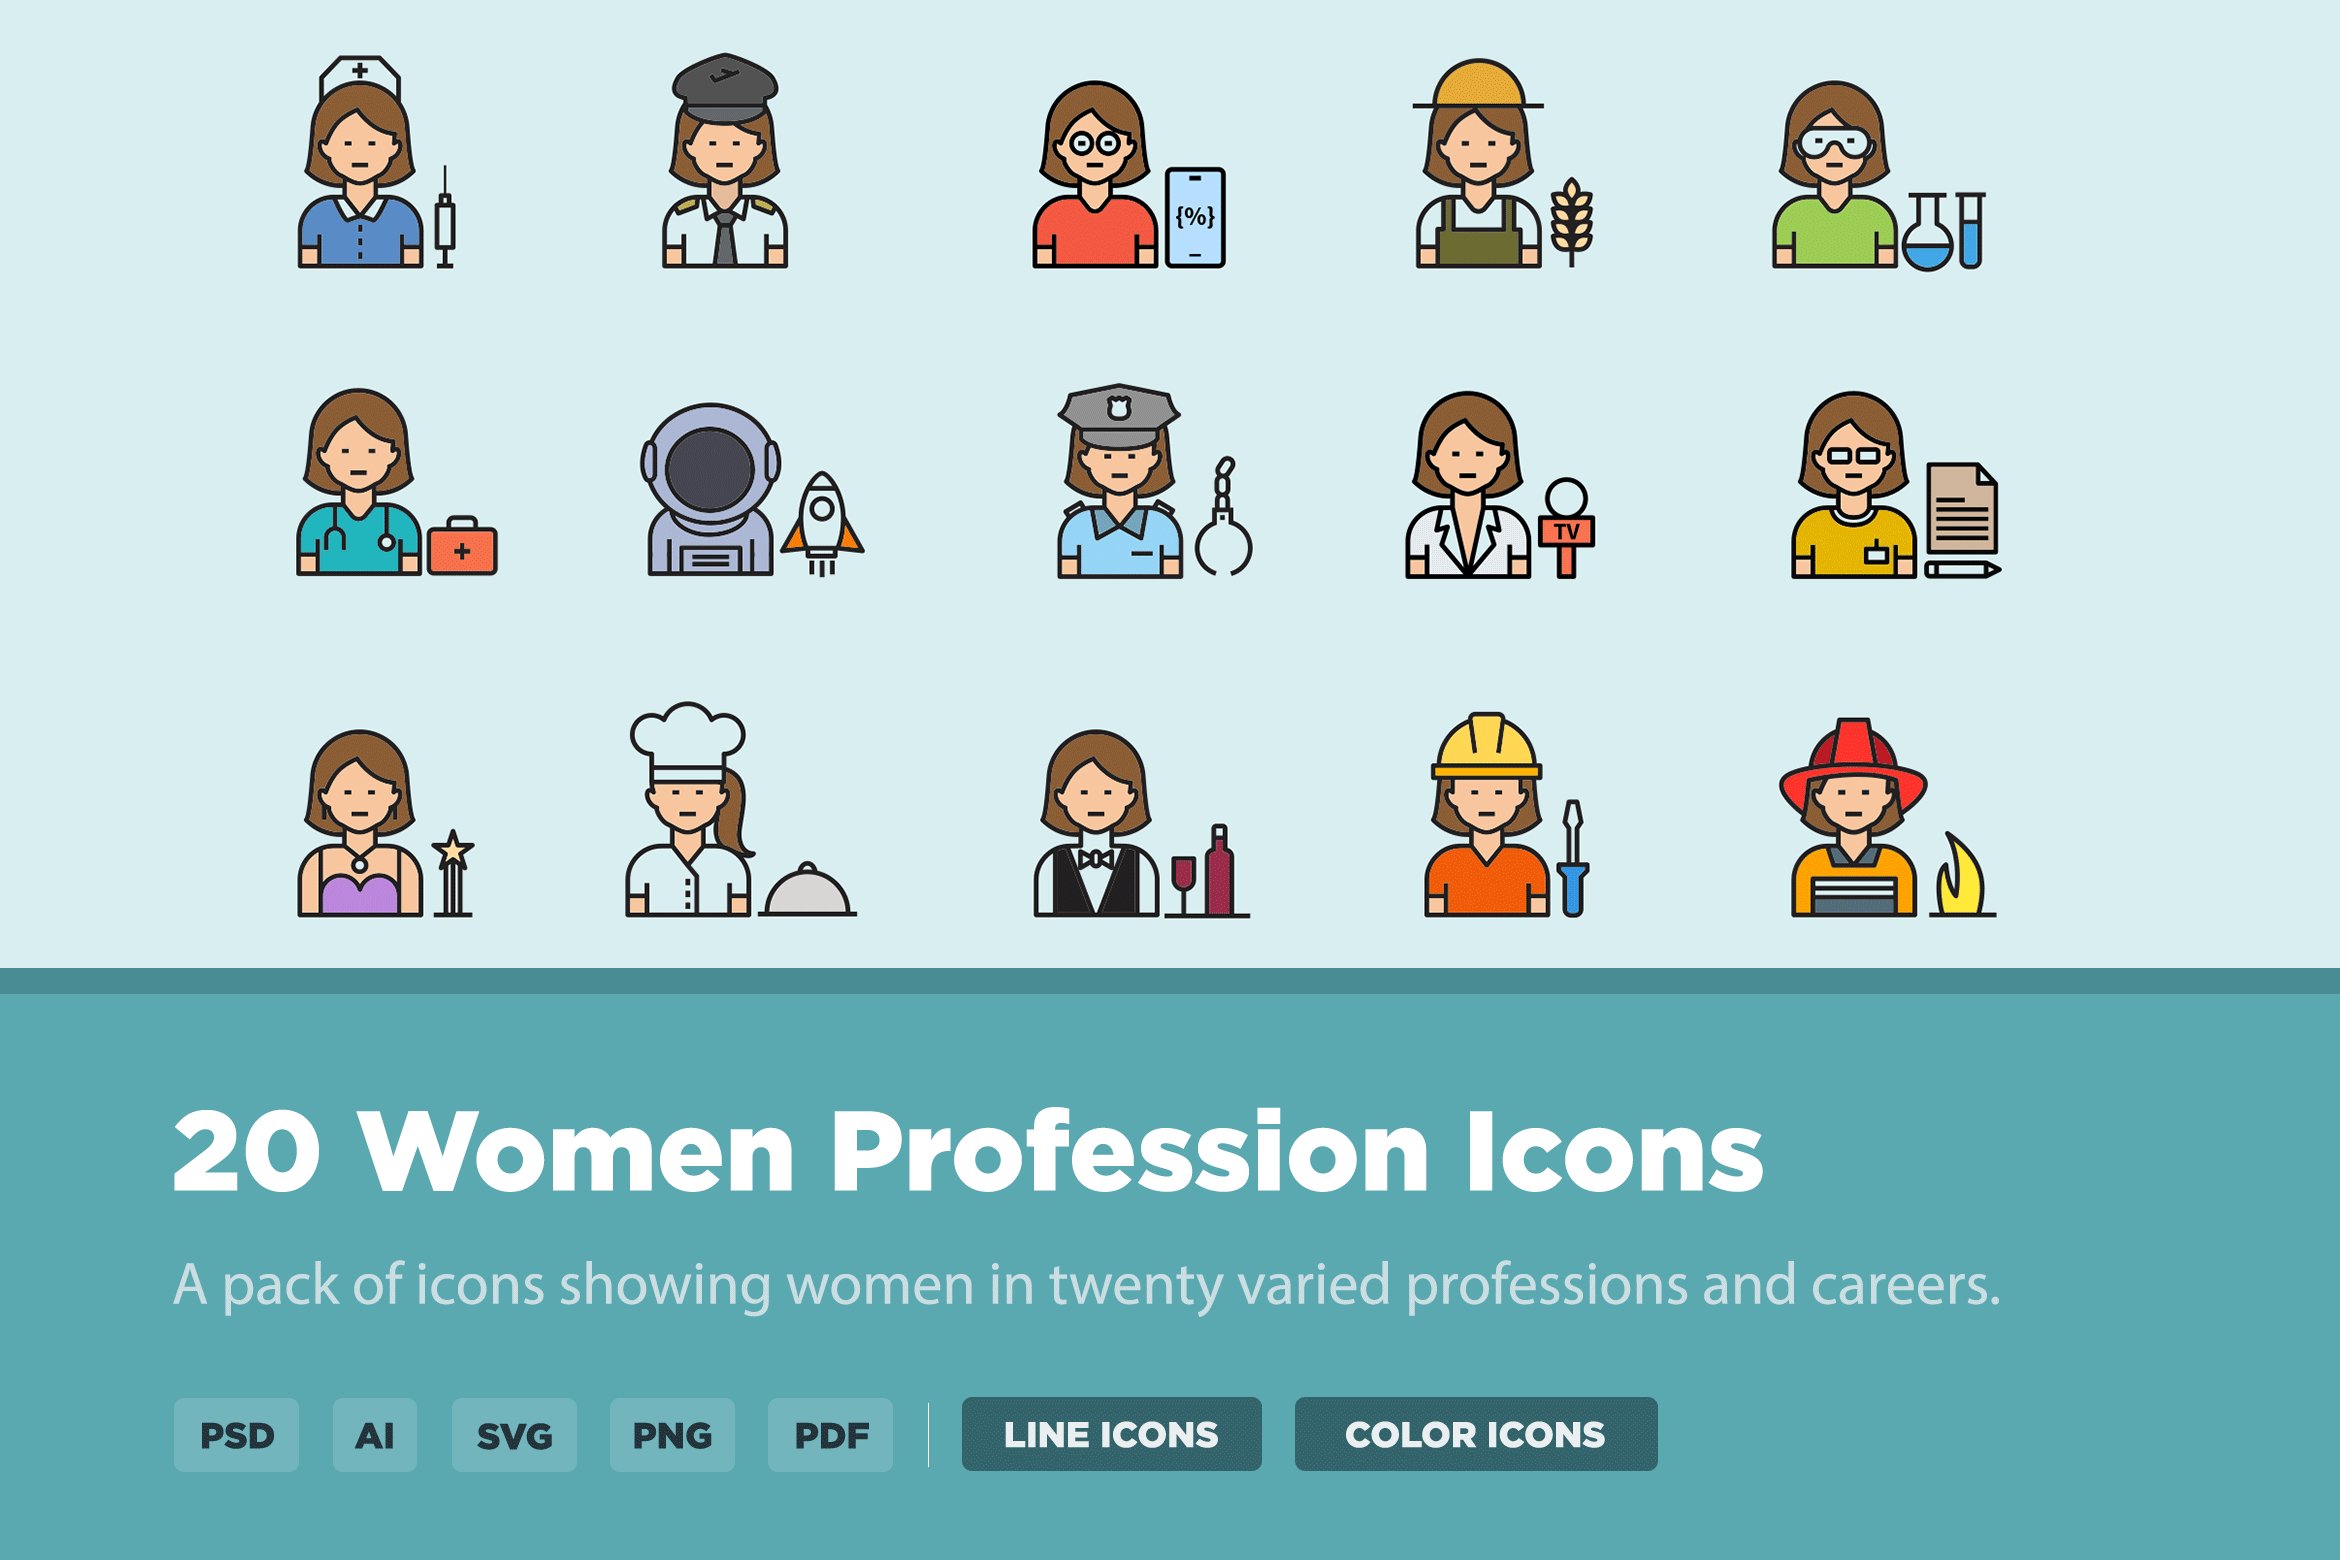 20 Woman Profession Icons cover image.